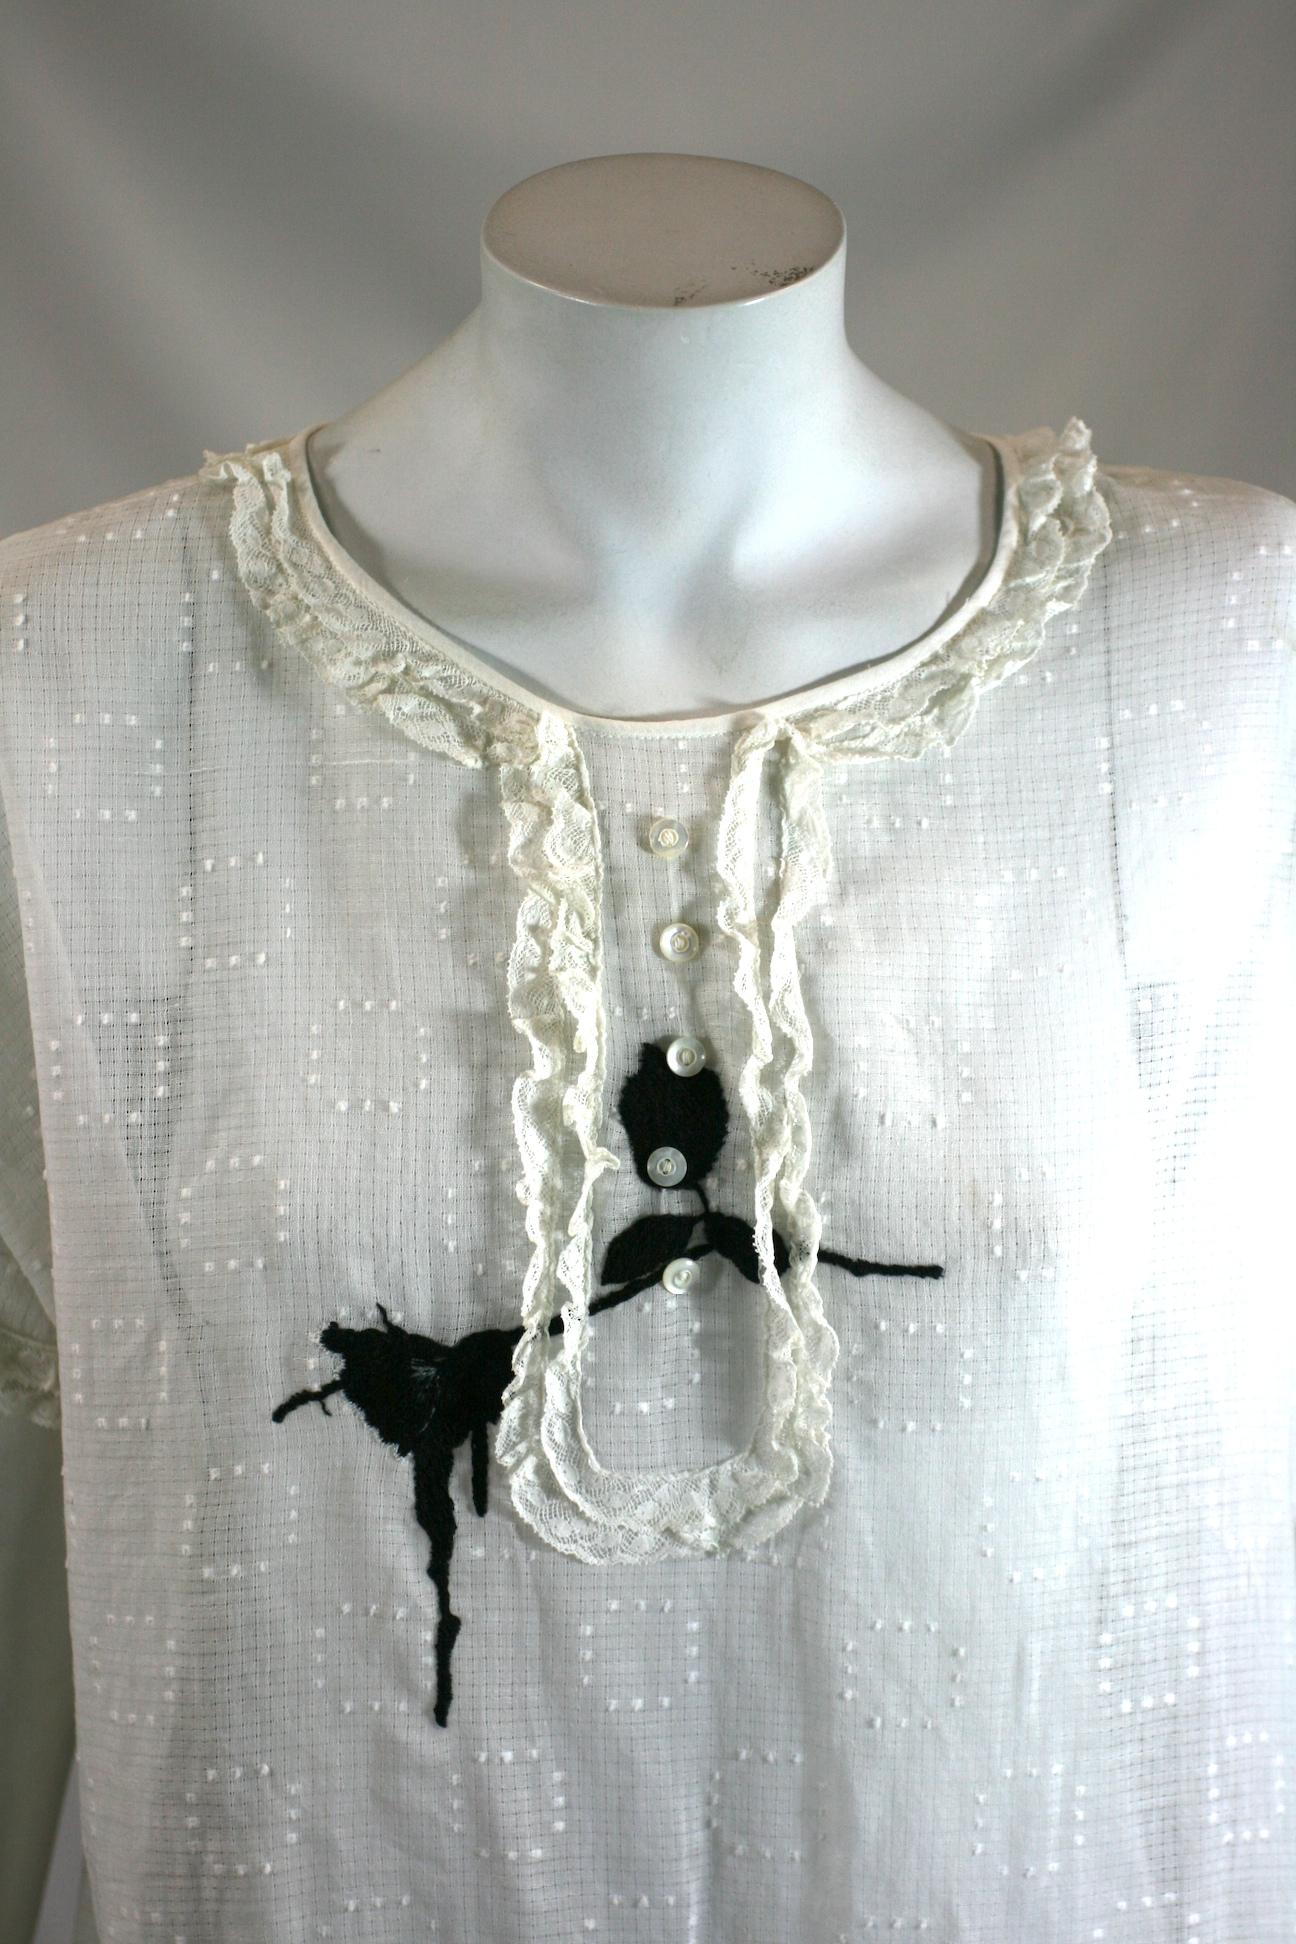 Upcycled Embroidered 1920's Batiste blouse by Studio VL. Period 1920's sheer cotton batiste swiss dot blouse with lace ruffle trim throughout. We have embroidered a silhouetted black rose through the center across the heart. 
Beautifully hand